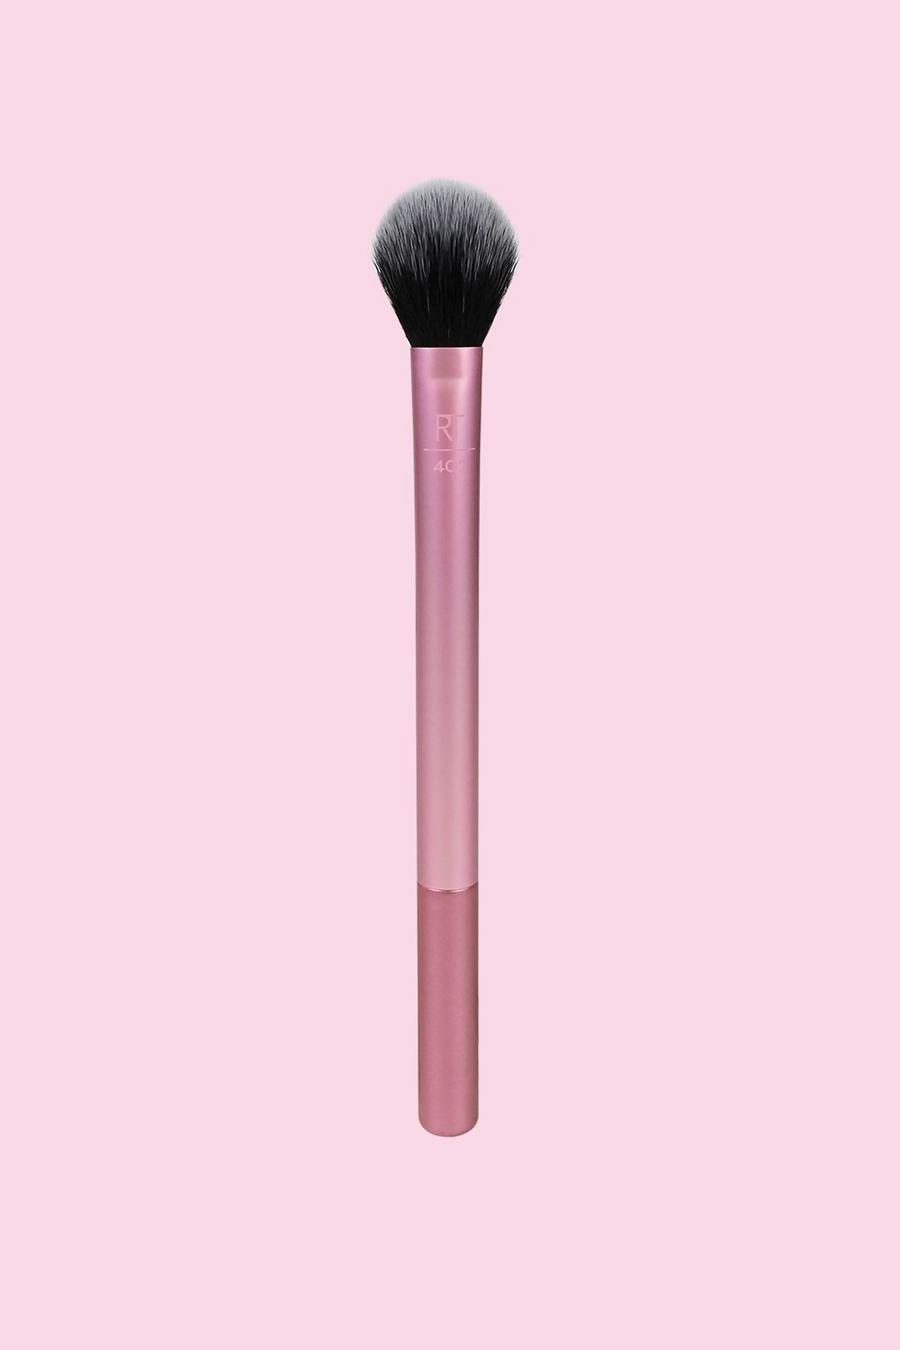 Pink REAL TECHNIQUES UNDER EYE SETTING POWDER MAKEUP BRUSH image number 1